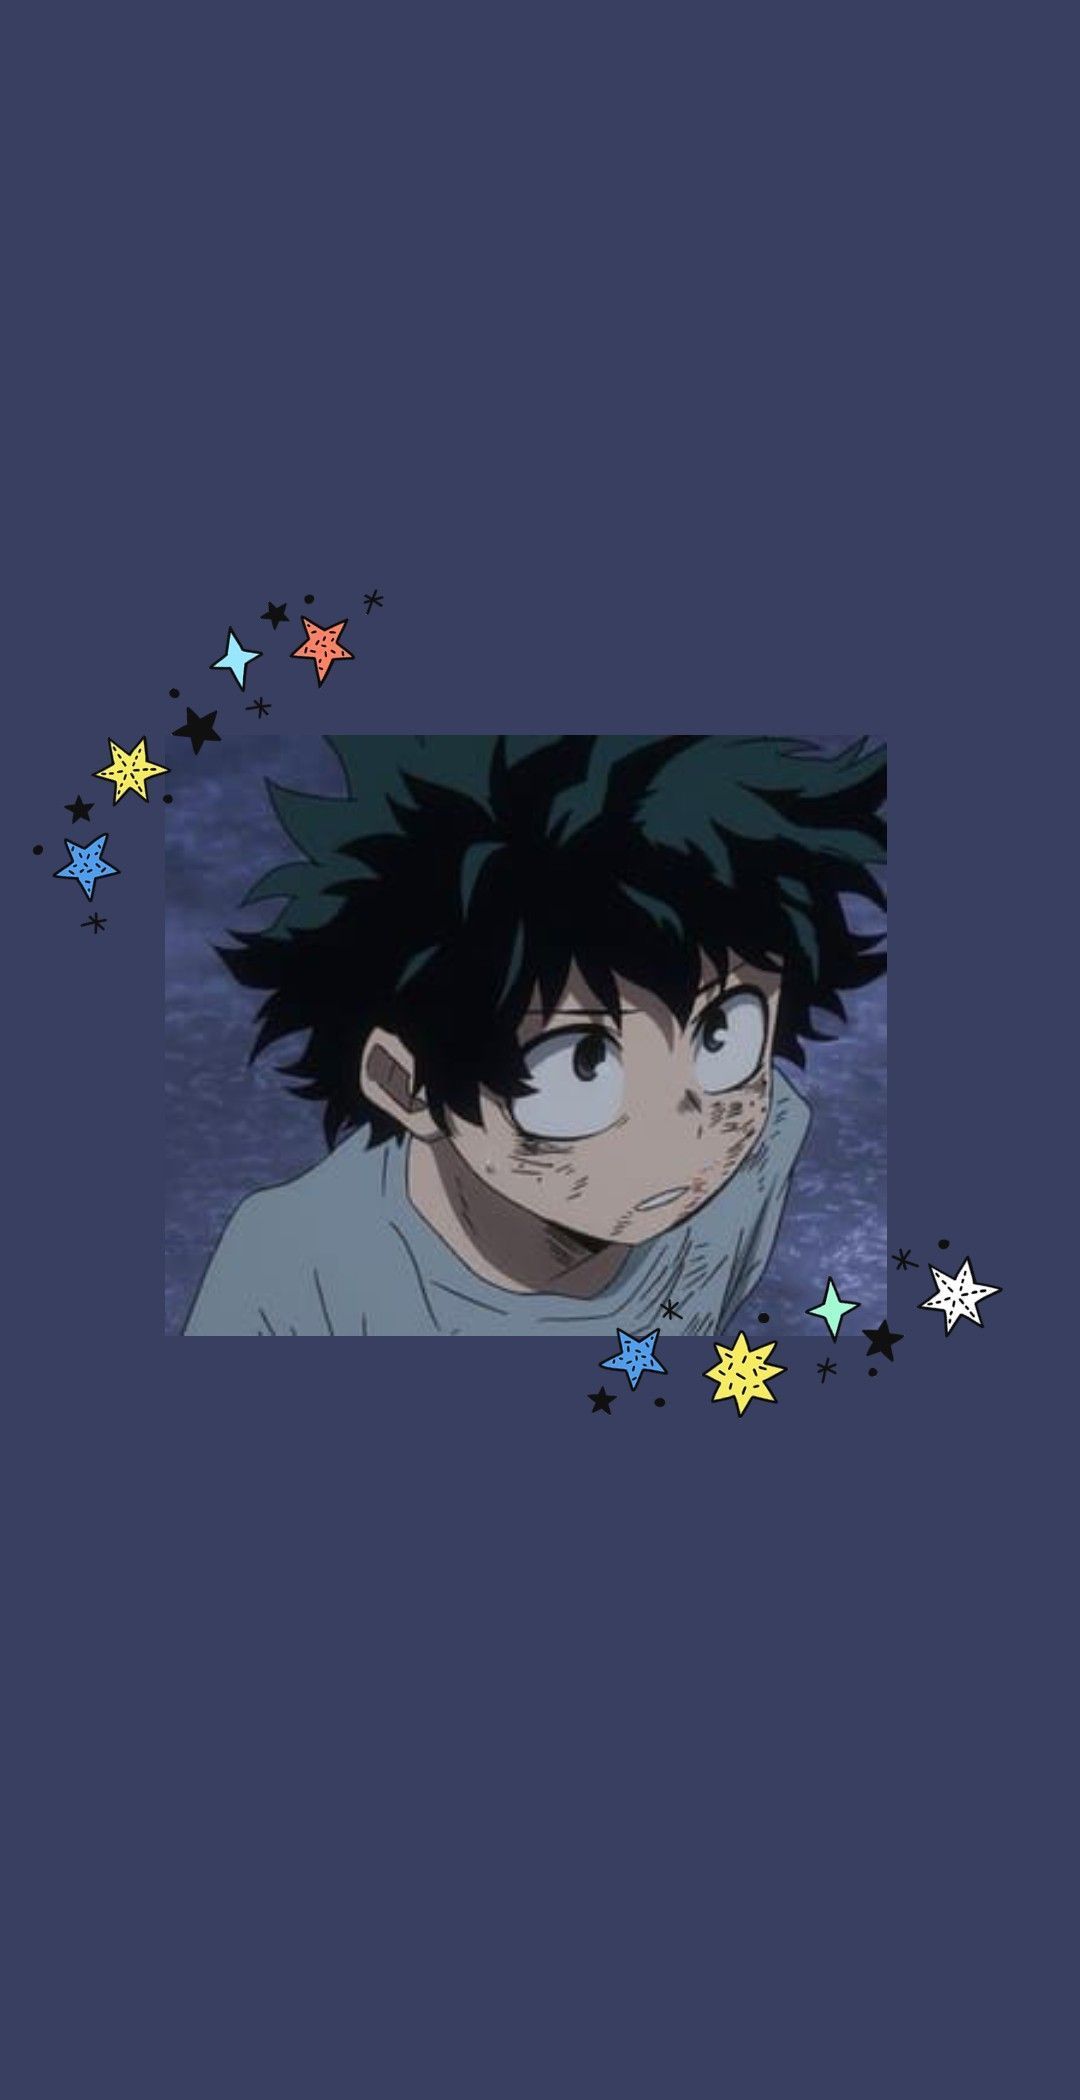 Ps4 Aesthetic Anime My Hero Academia Wallpapers Wallpaper Cave